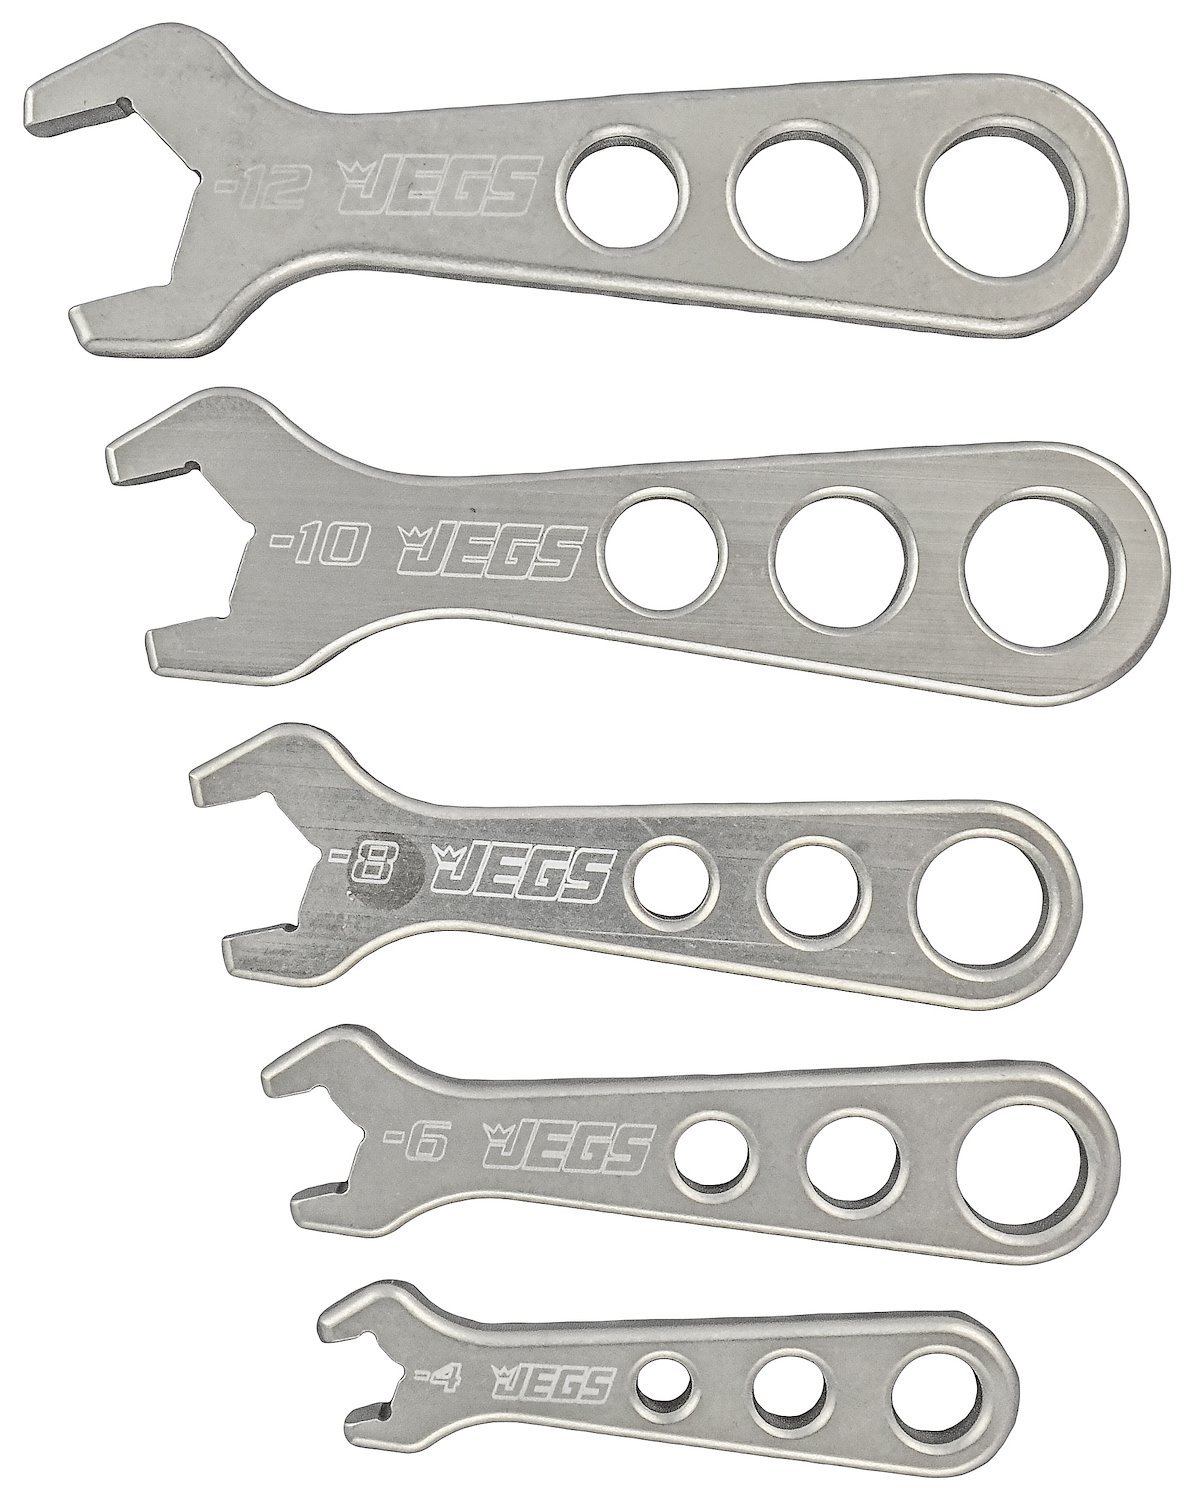 AN Wrench Set -4 AN to -12 AN Standard Wrenches